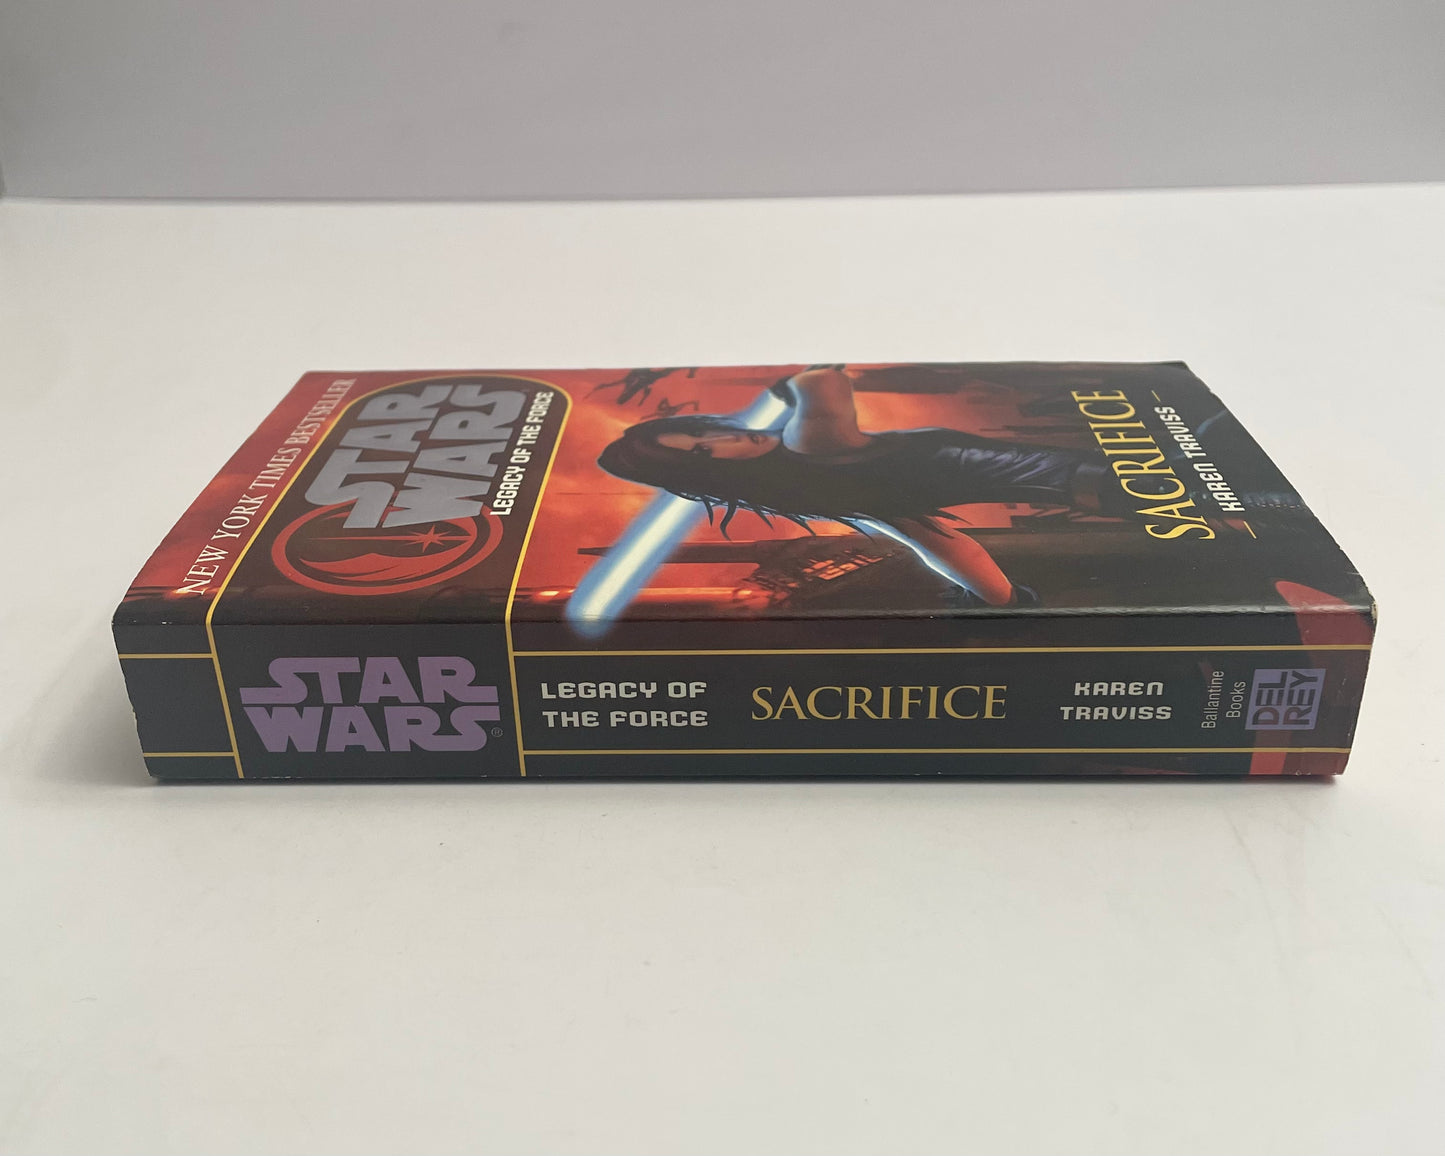 Star Wars Legacy Of The Force: Sacrifice